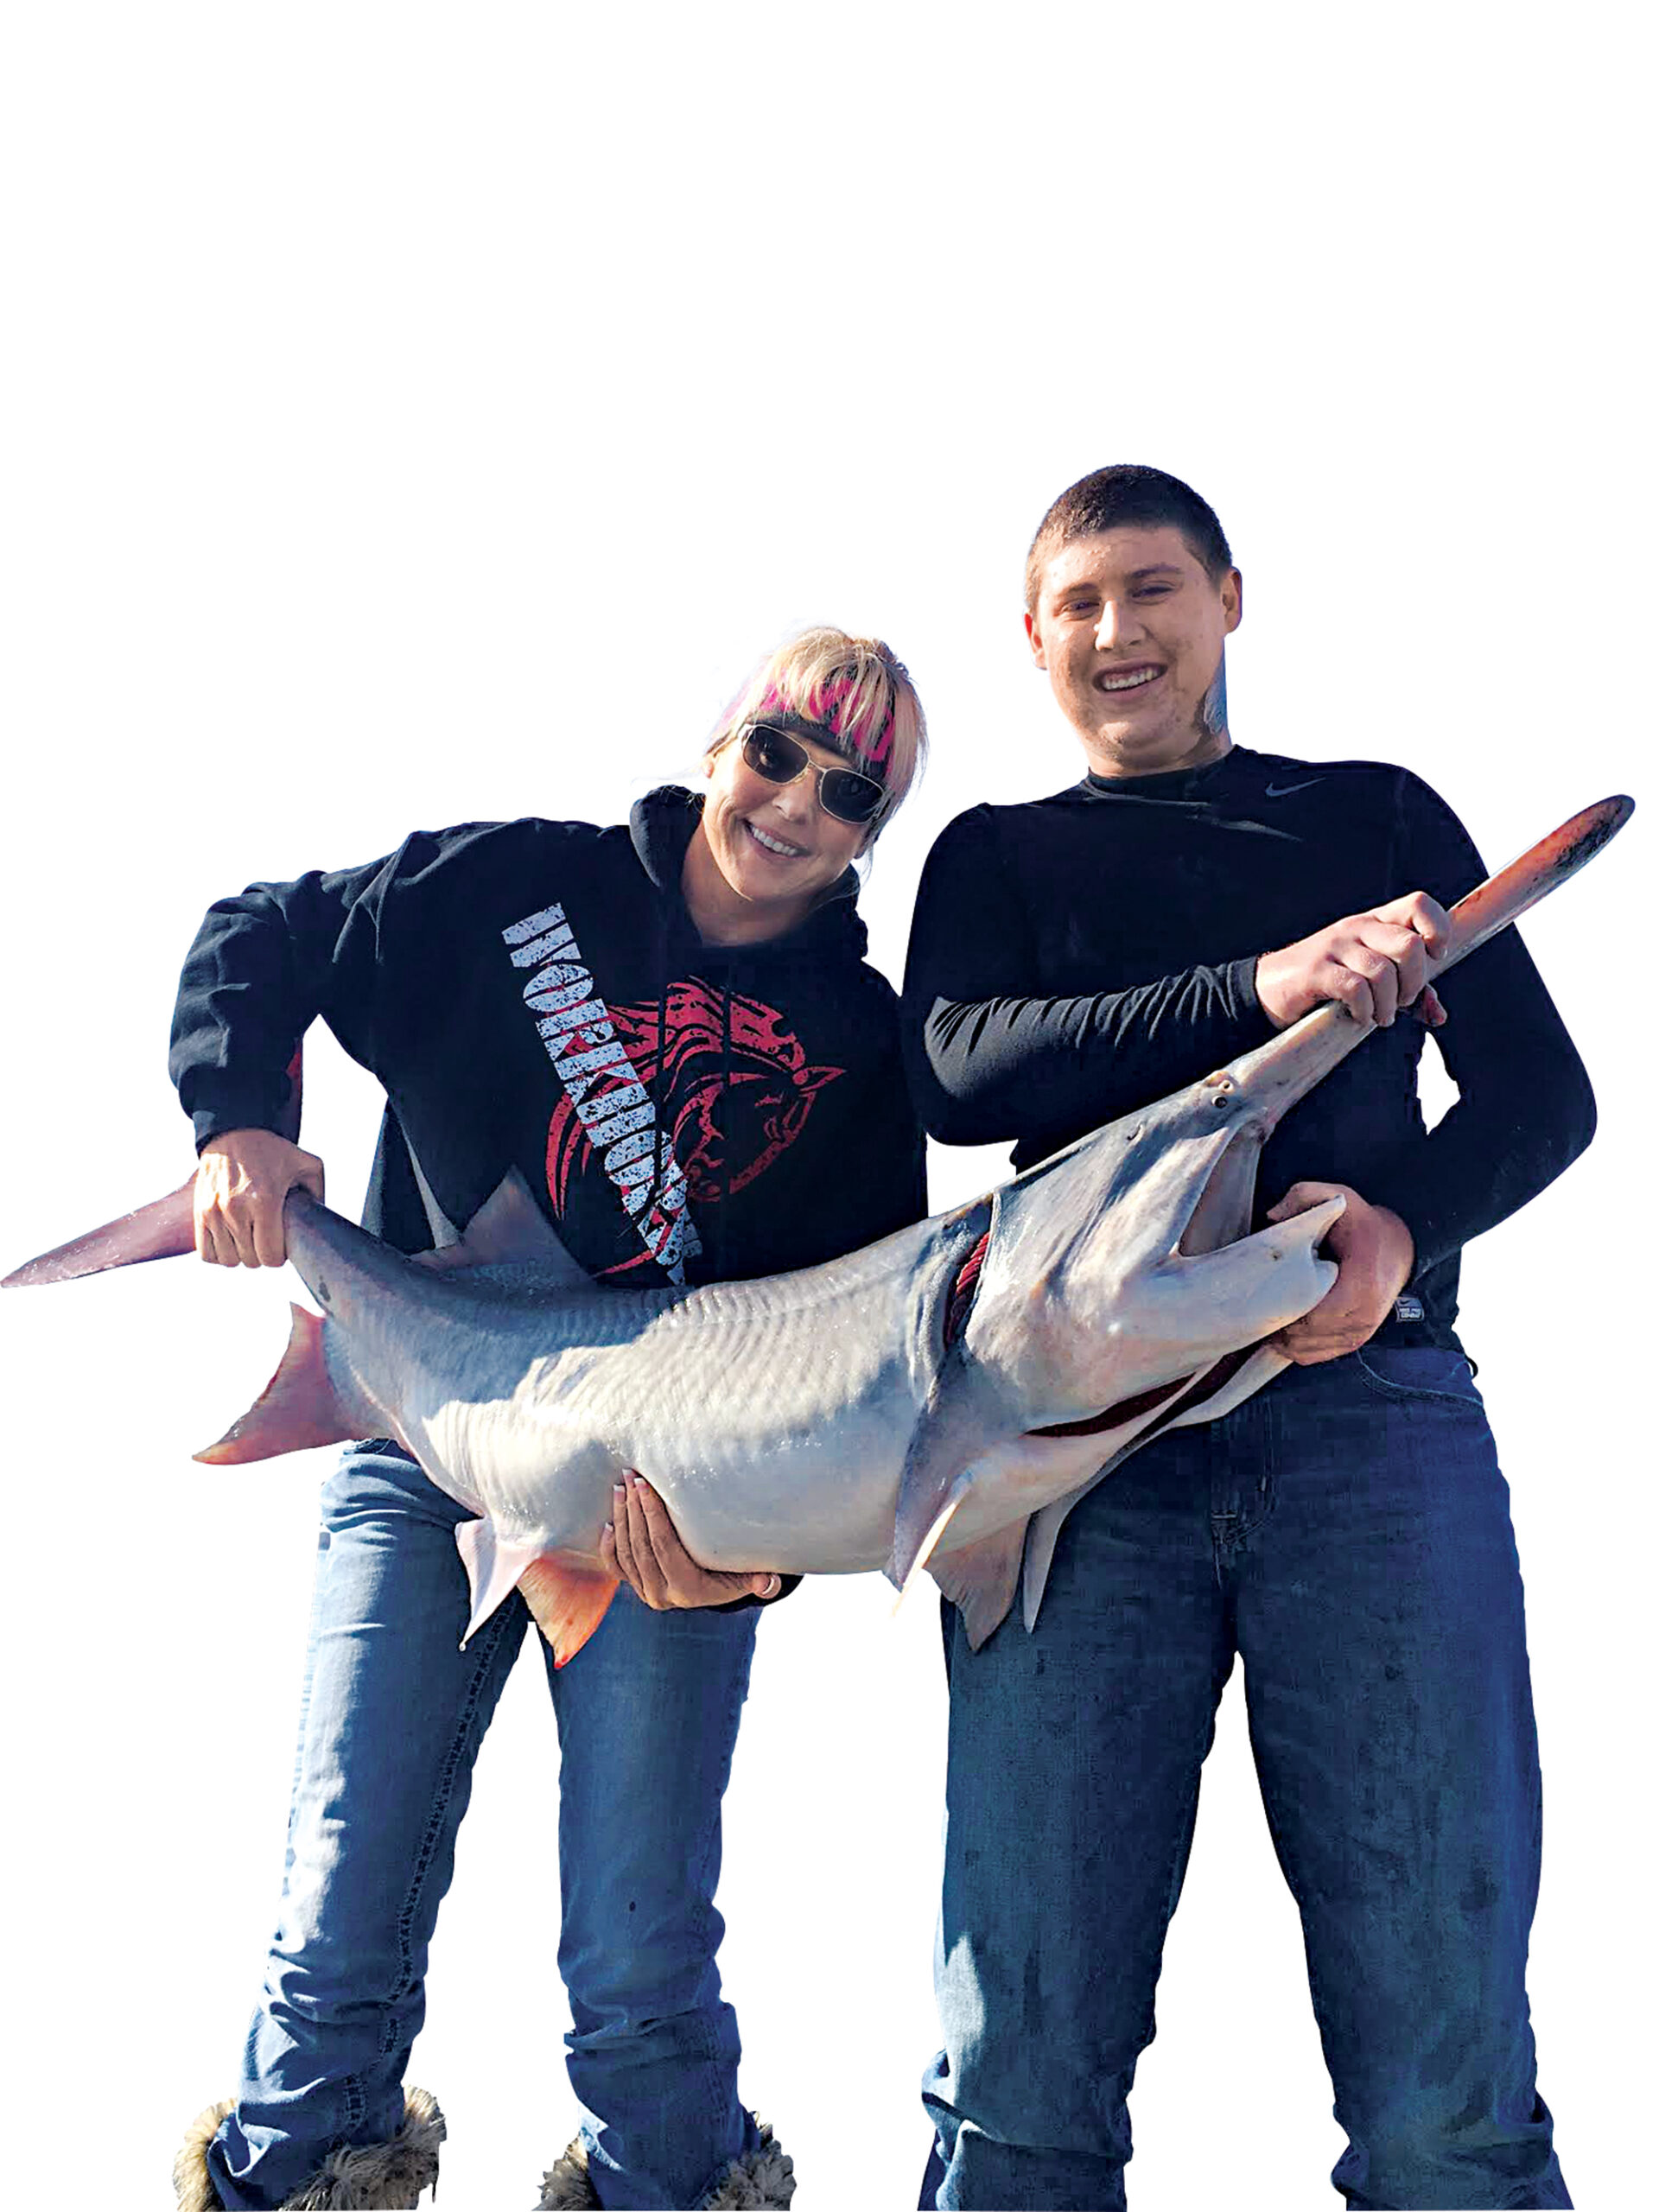 How To Catch Giant Paddlefish with Giant Hooks